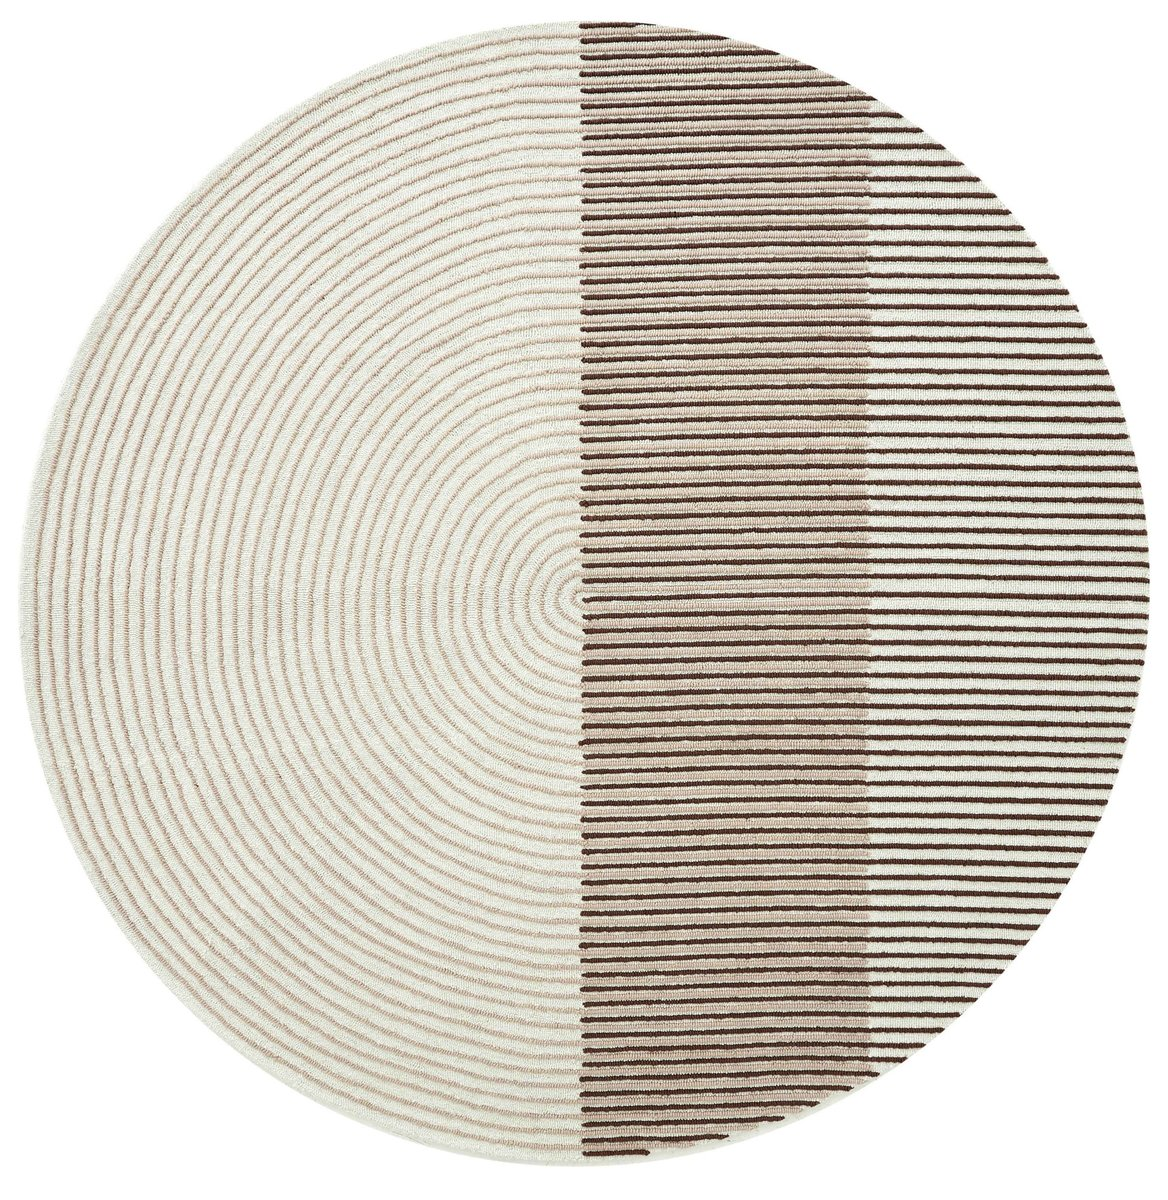 What are round area rugs?